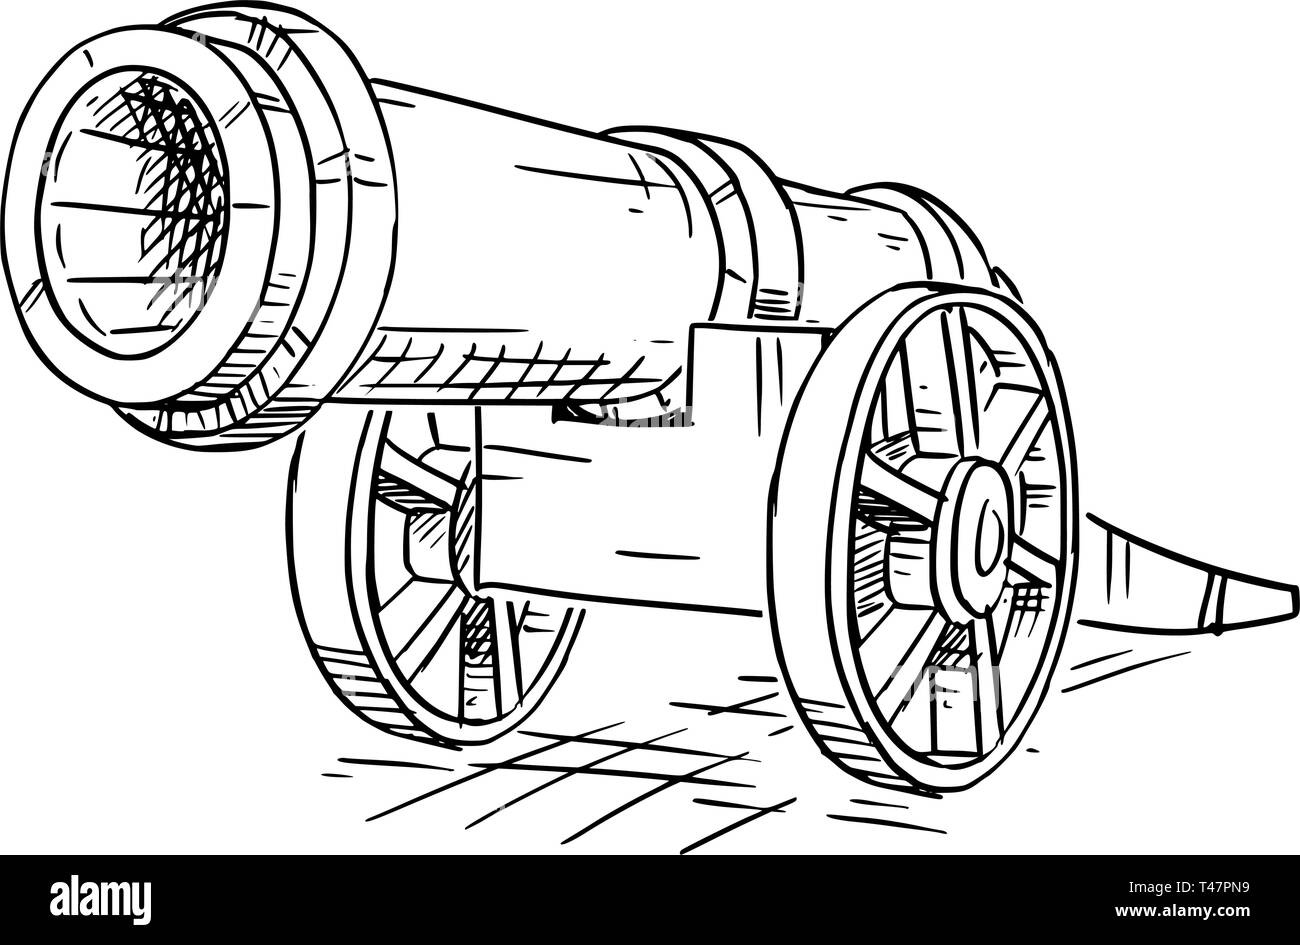 Cartoon drawing or illustration of old antique or vintage artillery cannon. Stock Vector